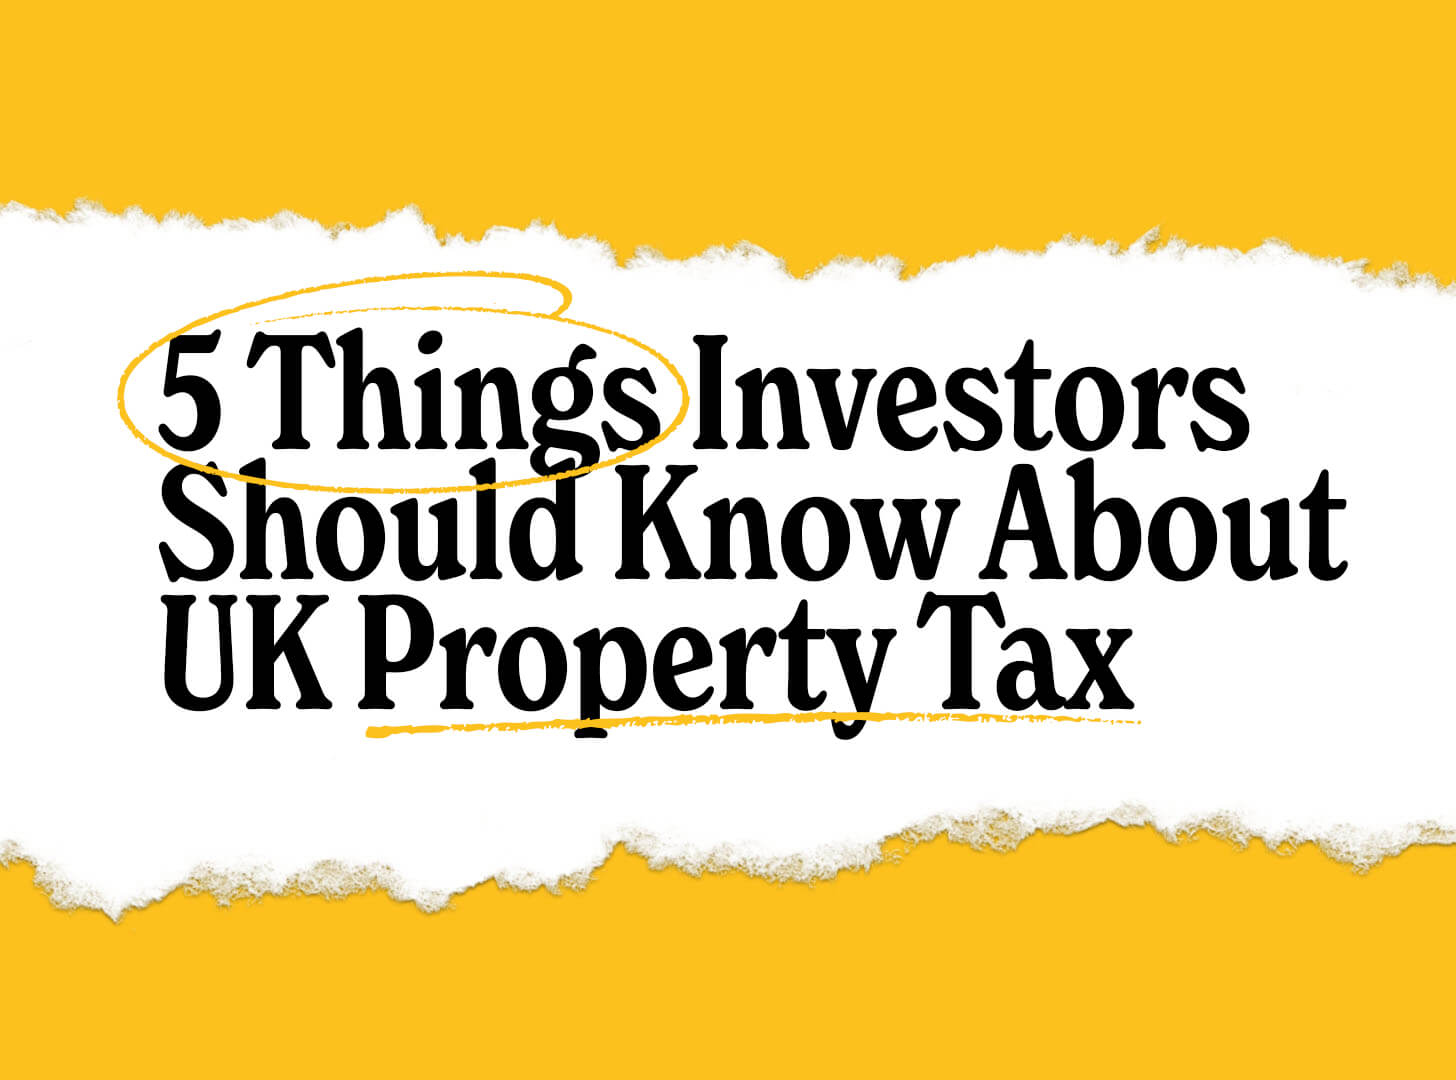 uk property tax featured image